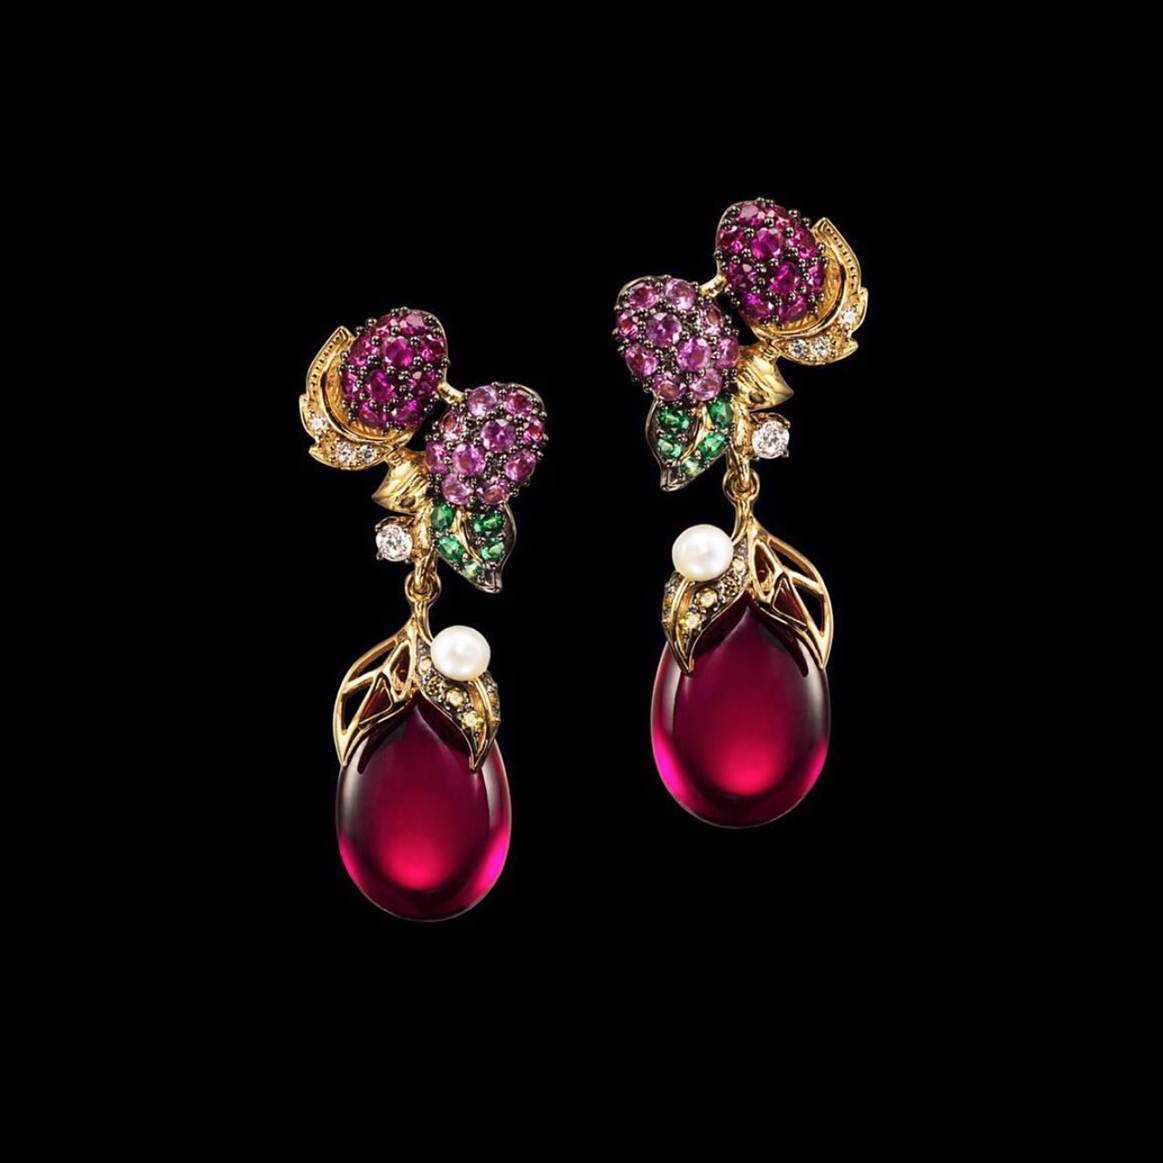 Raspberry Drop Earrings, Earring, Anabela Chan Joaillerie - Fine jewelry with laboratory grown and created gemstones hand-crafted in the United Kingdom. Anabela Chan Joaillerie is the first fine jewellery brand in the world to champion laboratory-grown and created gemstones with high jewellery design, artisanal craftsmanship and a focus on ethical and sustainable innovations.